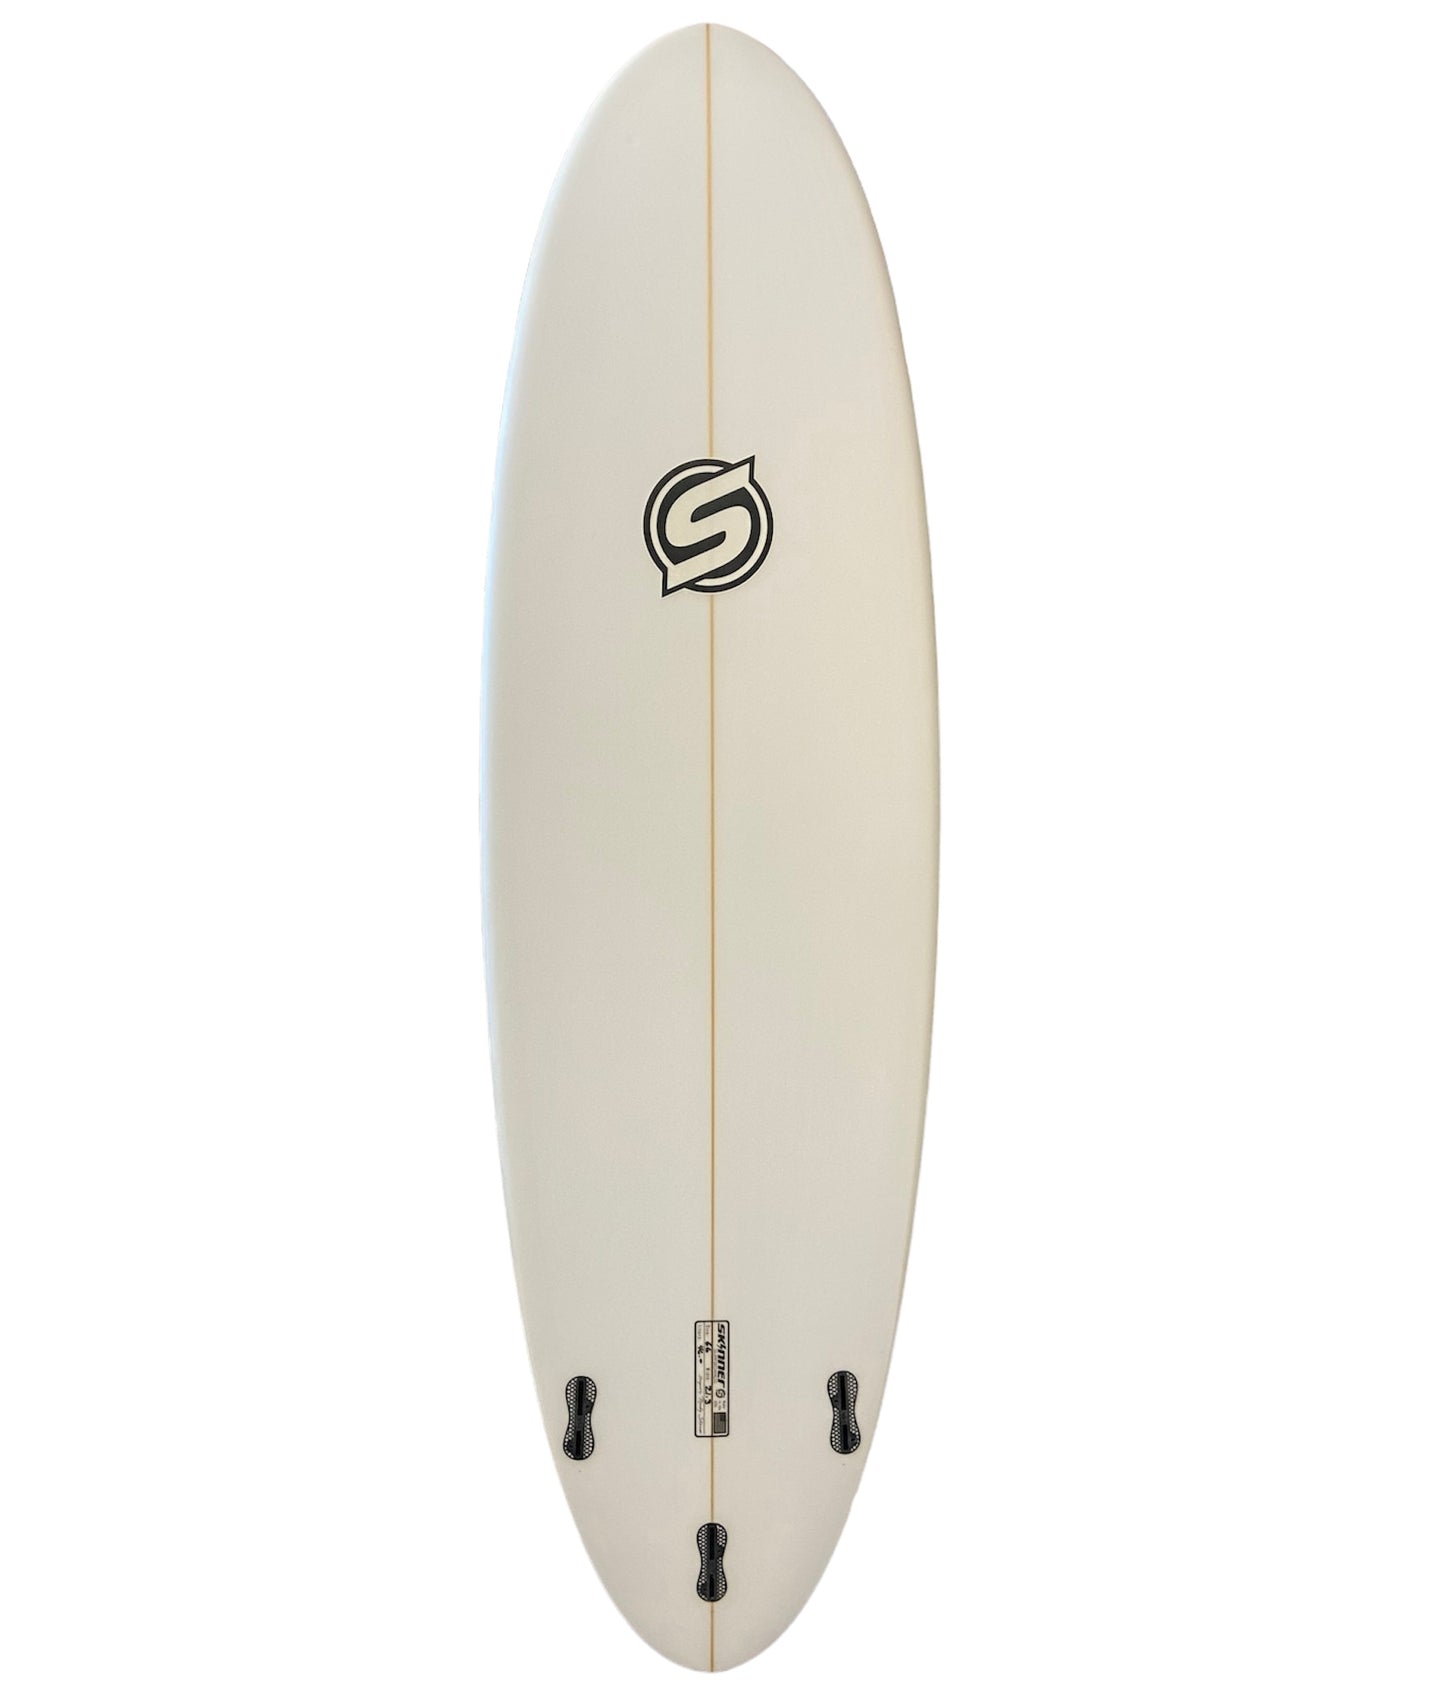 Skinner Surfboards 6'6" x 21.3 x 2.75" Poly Double Ender 5 FCS2 plugs 46L Surfboard